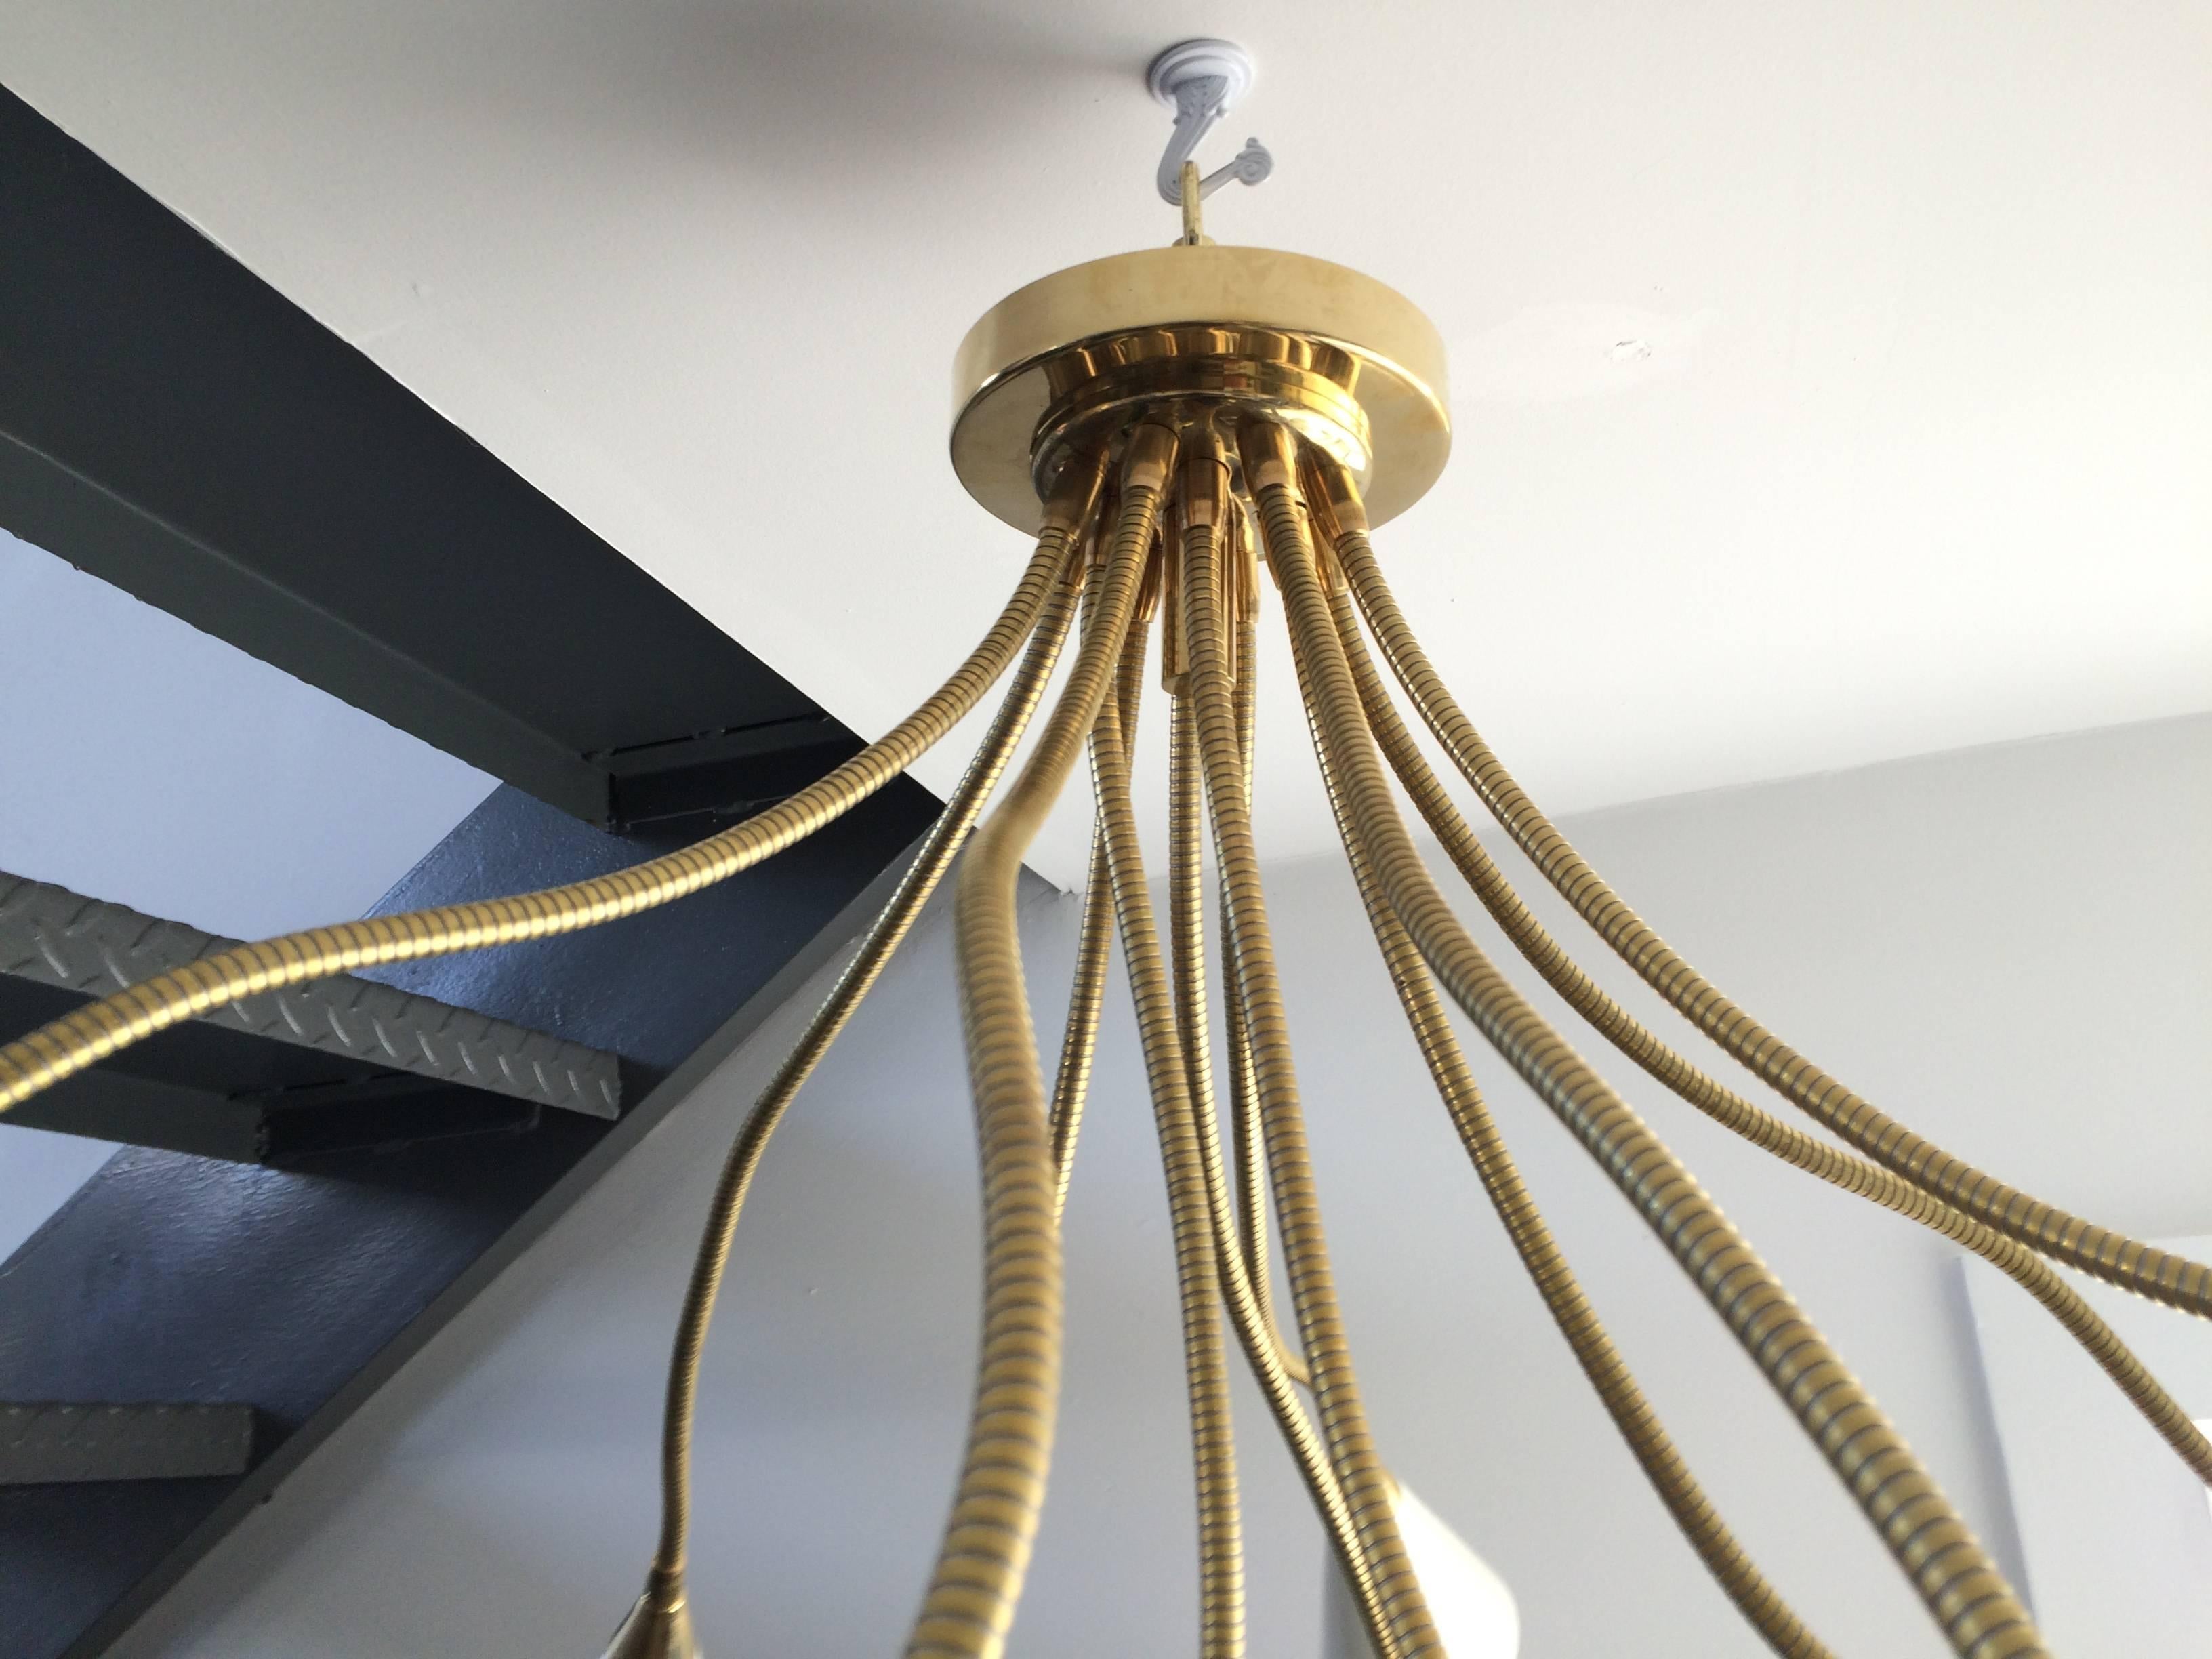 This flush mount brass chandelier has twelve arms or lights
with enameled white aluminium reflectors at the ends
of the flexible brass tubing. Arms radiate from the polished
brass canopy which can be adjusted in any direction.
Arms are fully